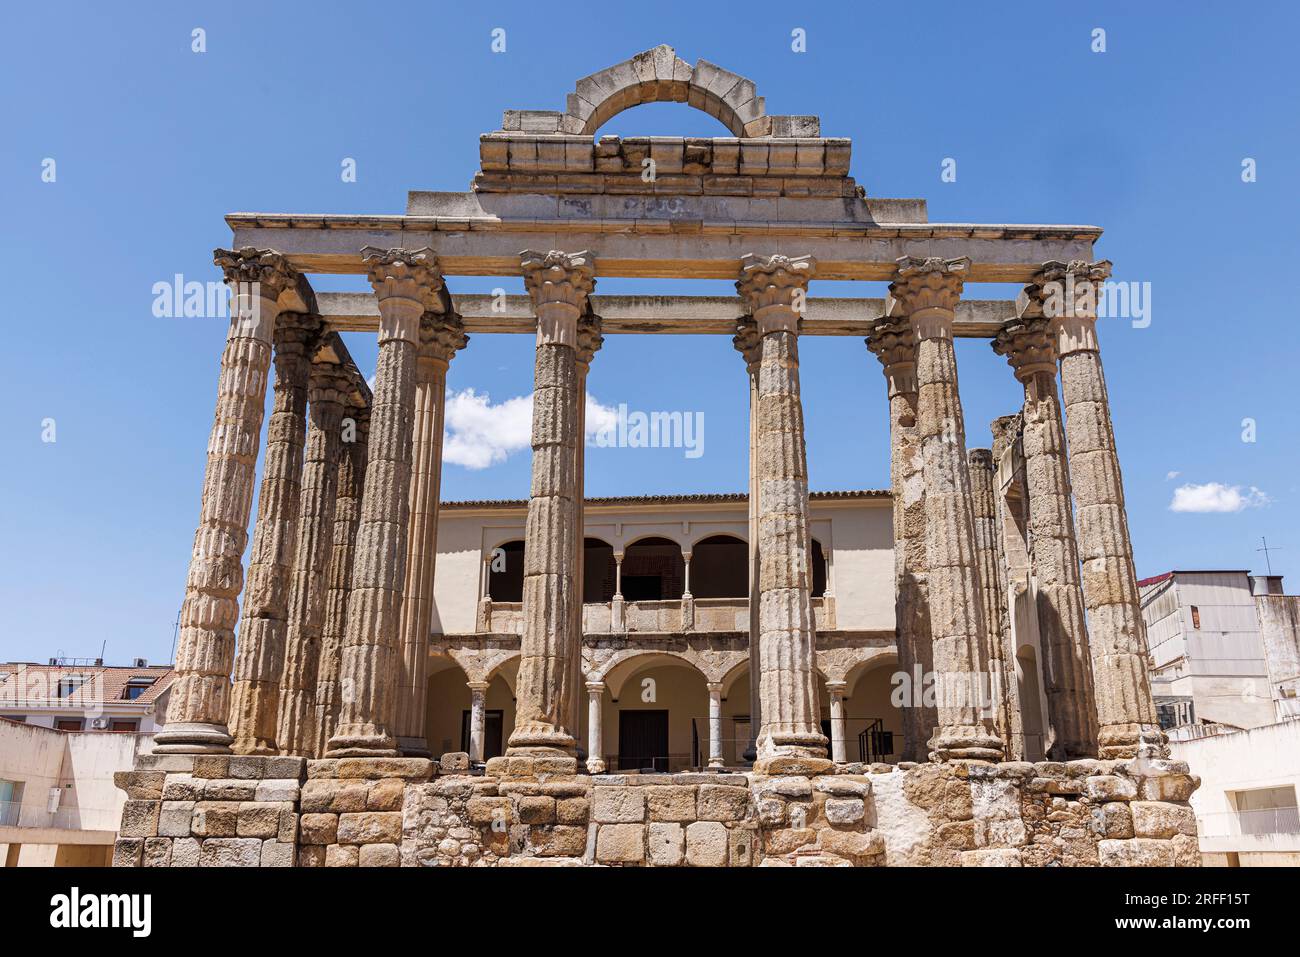 Spain, Extremadura, Merida, Archaeological Ensemble of Merida listed as World Heritage by UNESCO, the roman ruins of Augusta Emerita, the Diana temple or Los Corbos Palace Stock Photo